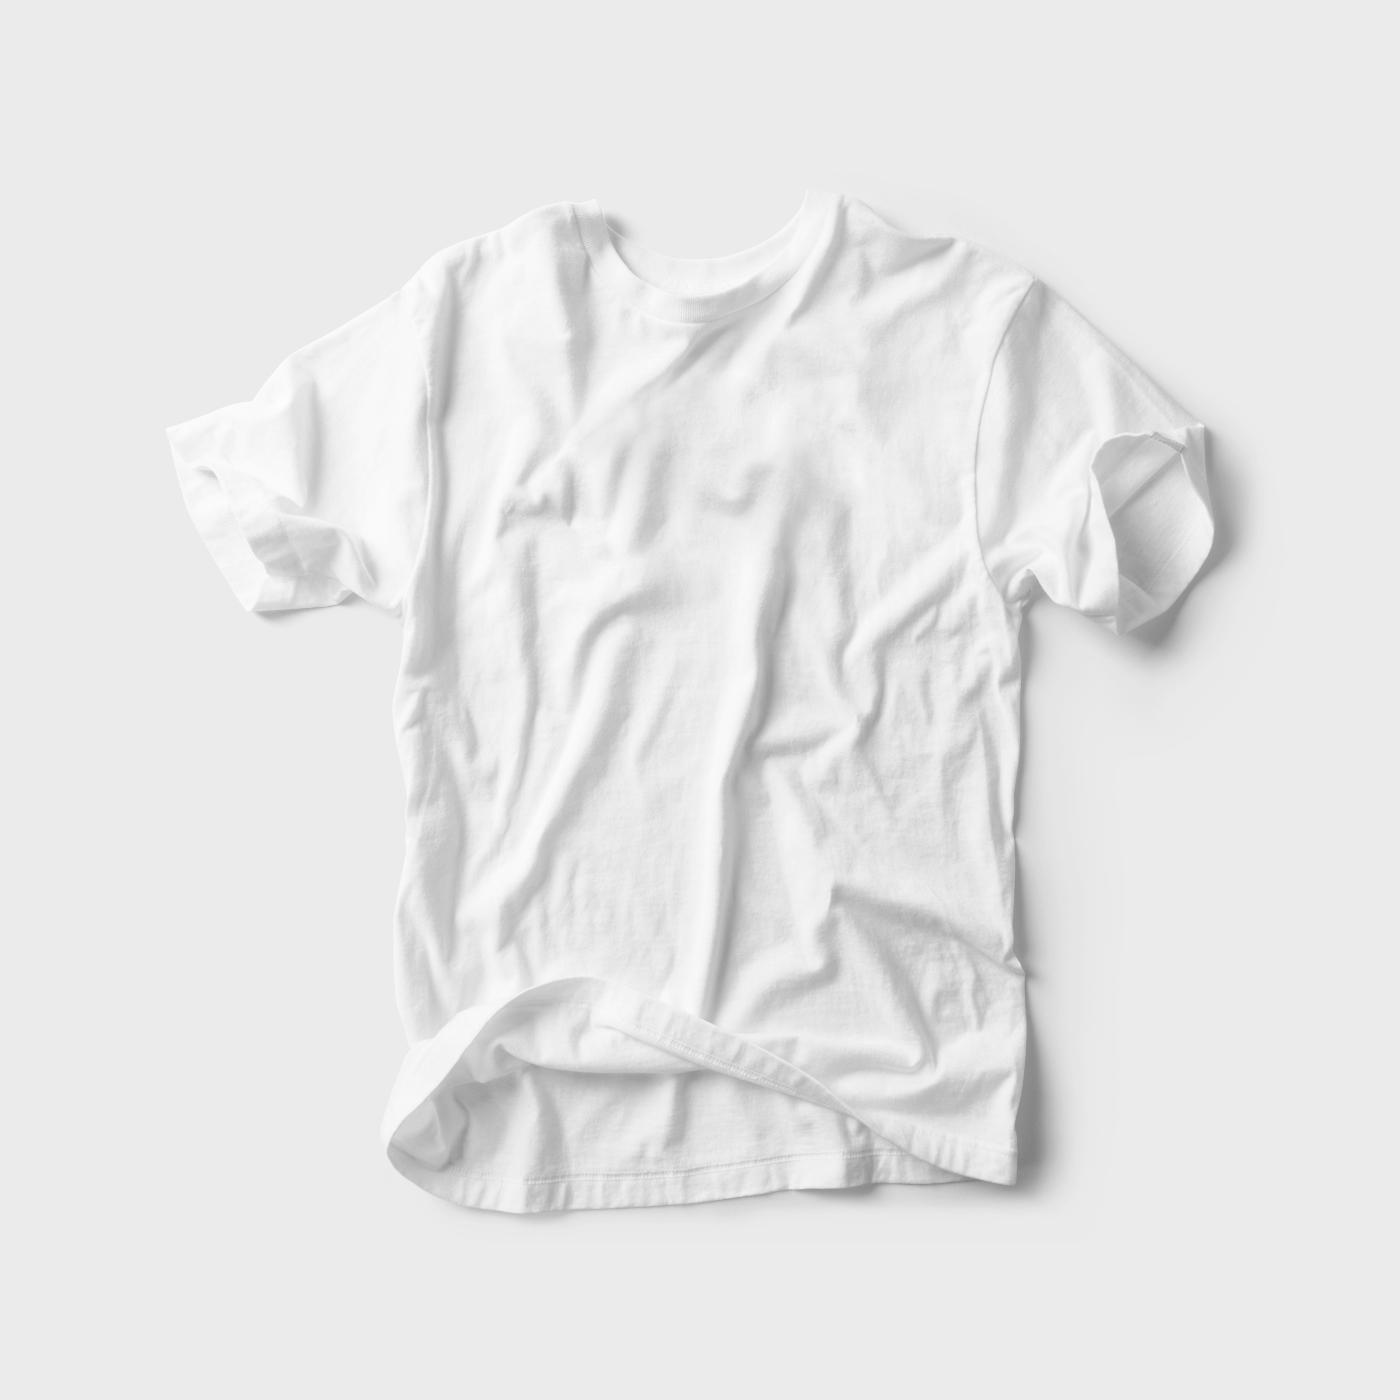 Front View of Round Neck Crumpled T-shirt Mockup FREE PSD